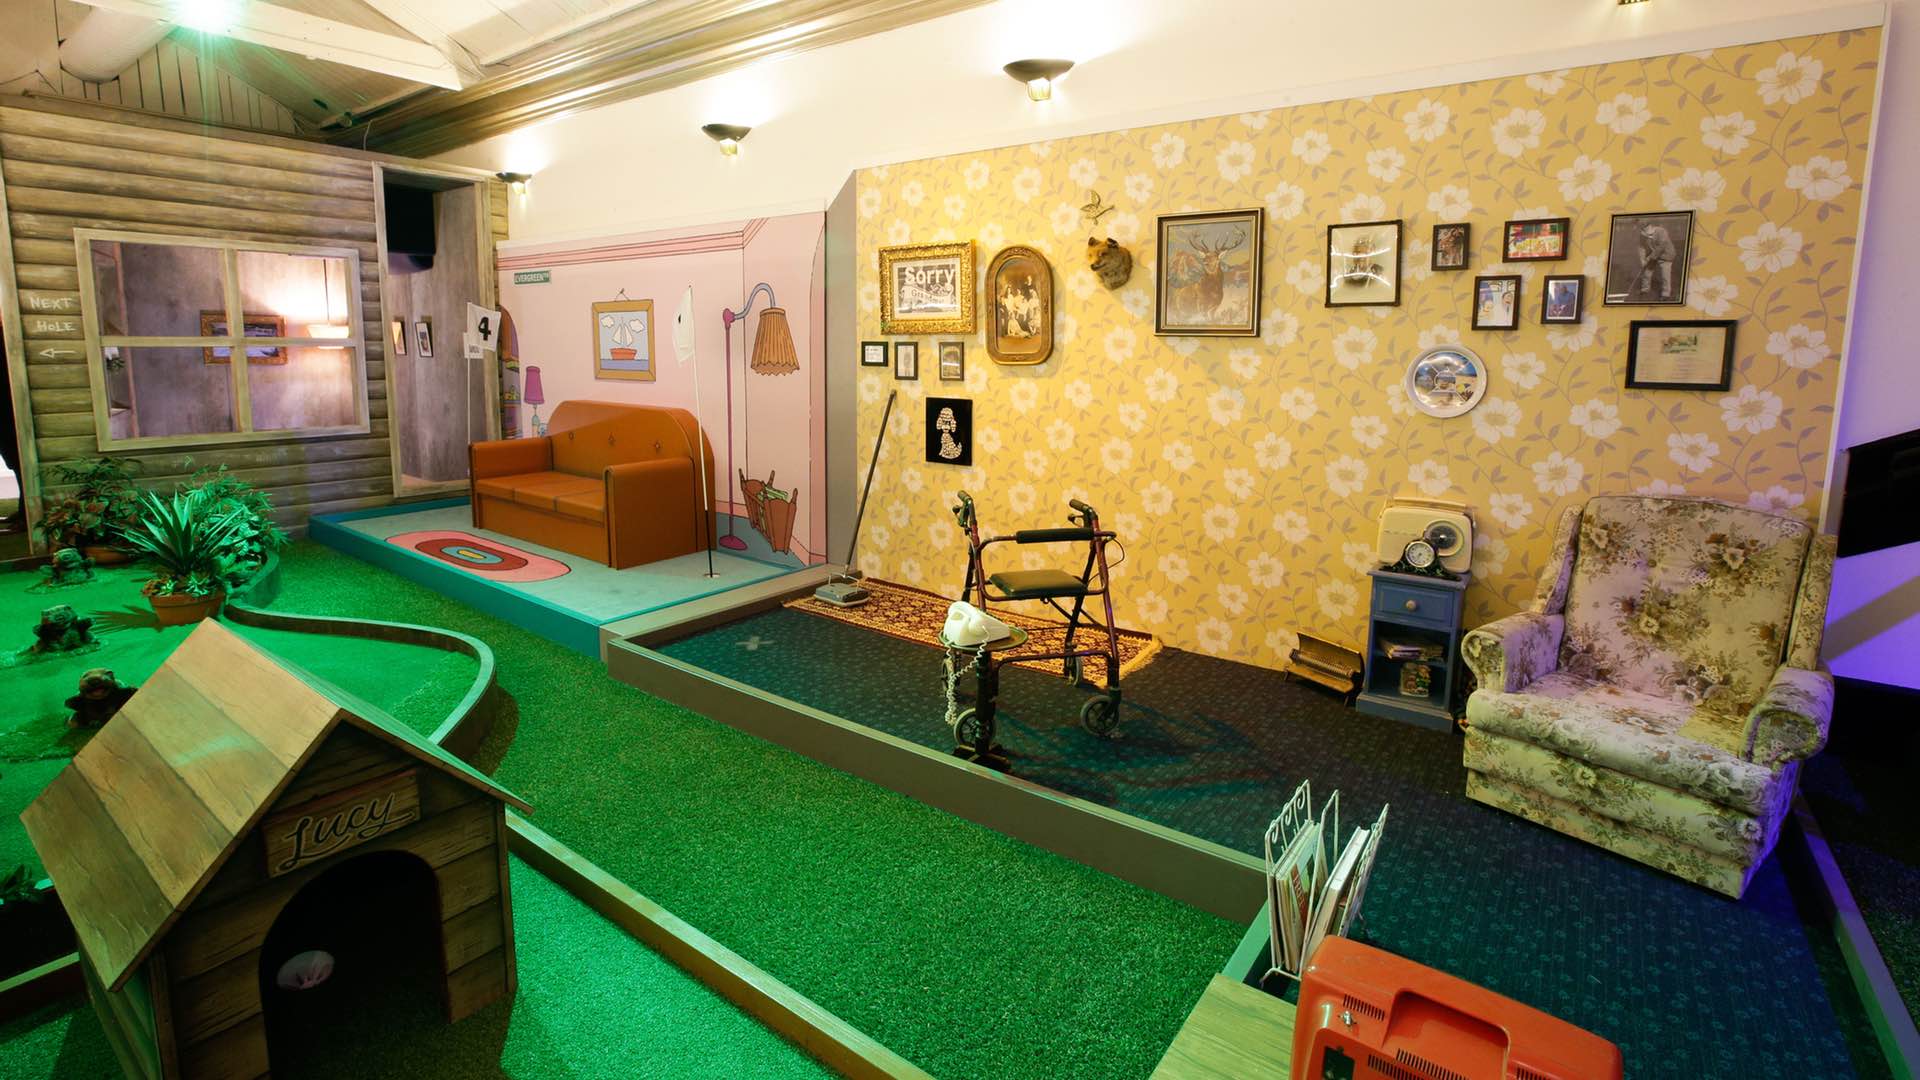 Sydney's New Two-Storey Mini-Golf Bar Holey Moley to Open This July